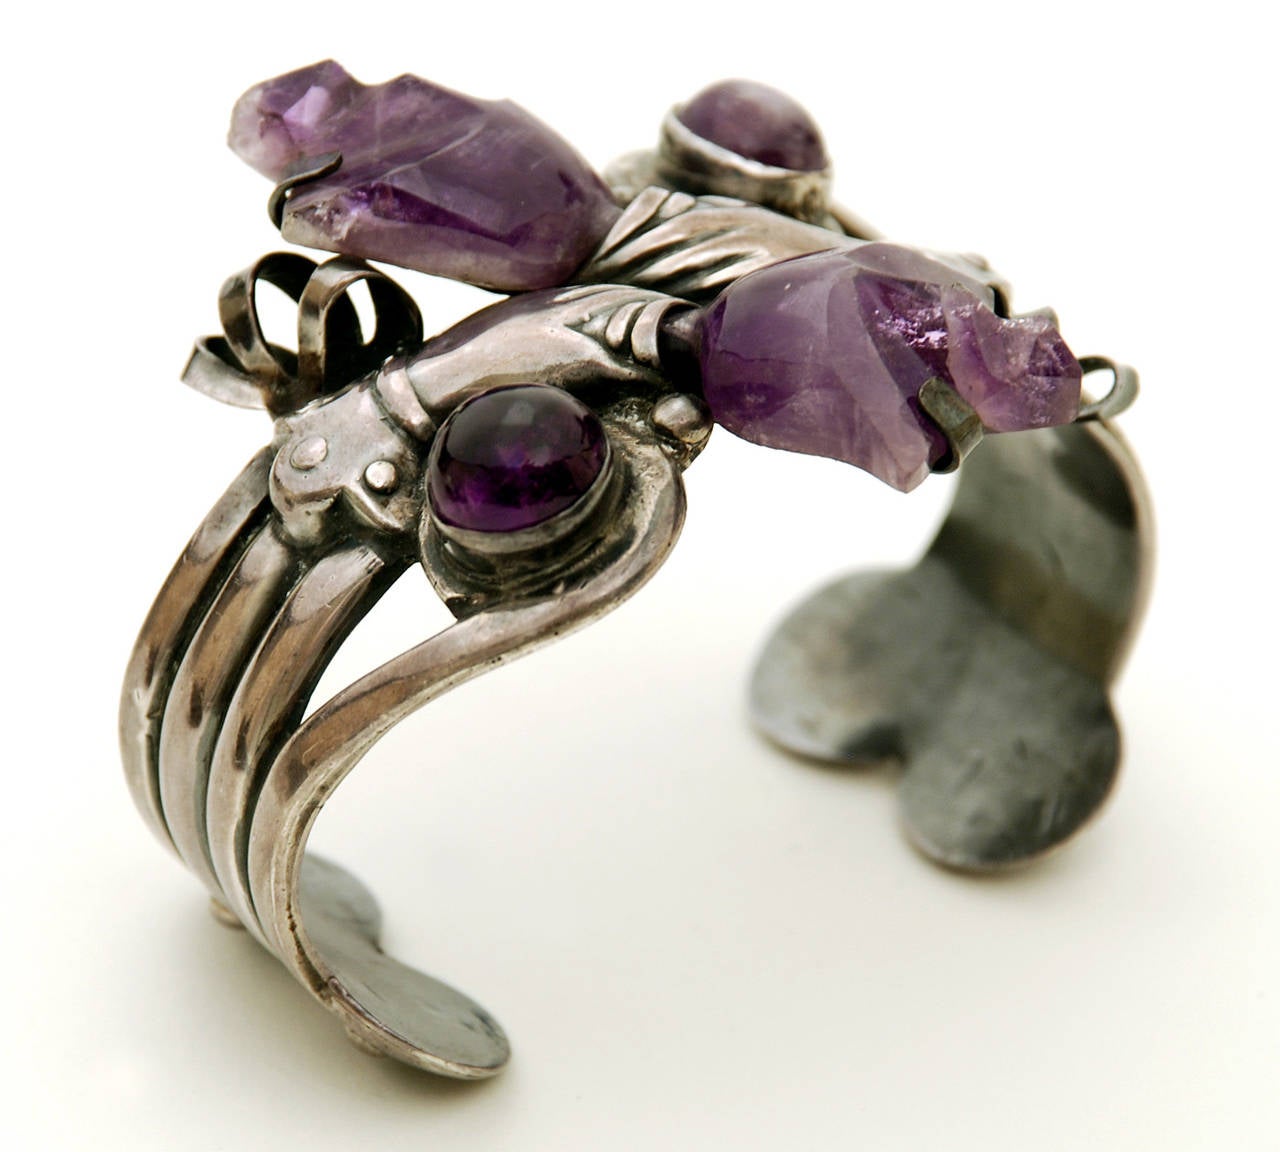 Vintage Mexican Silver and Amethyst Cuff Bracelet, circa 1940s For Sale 1